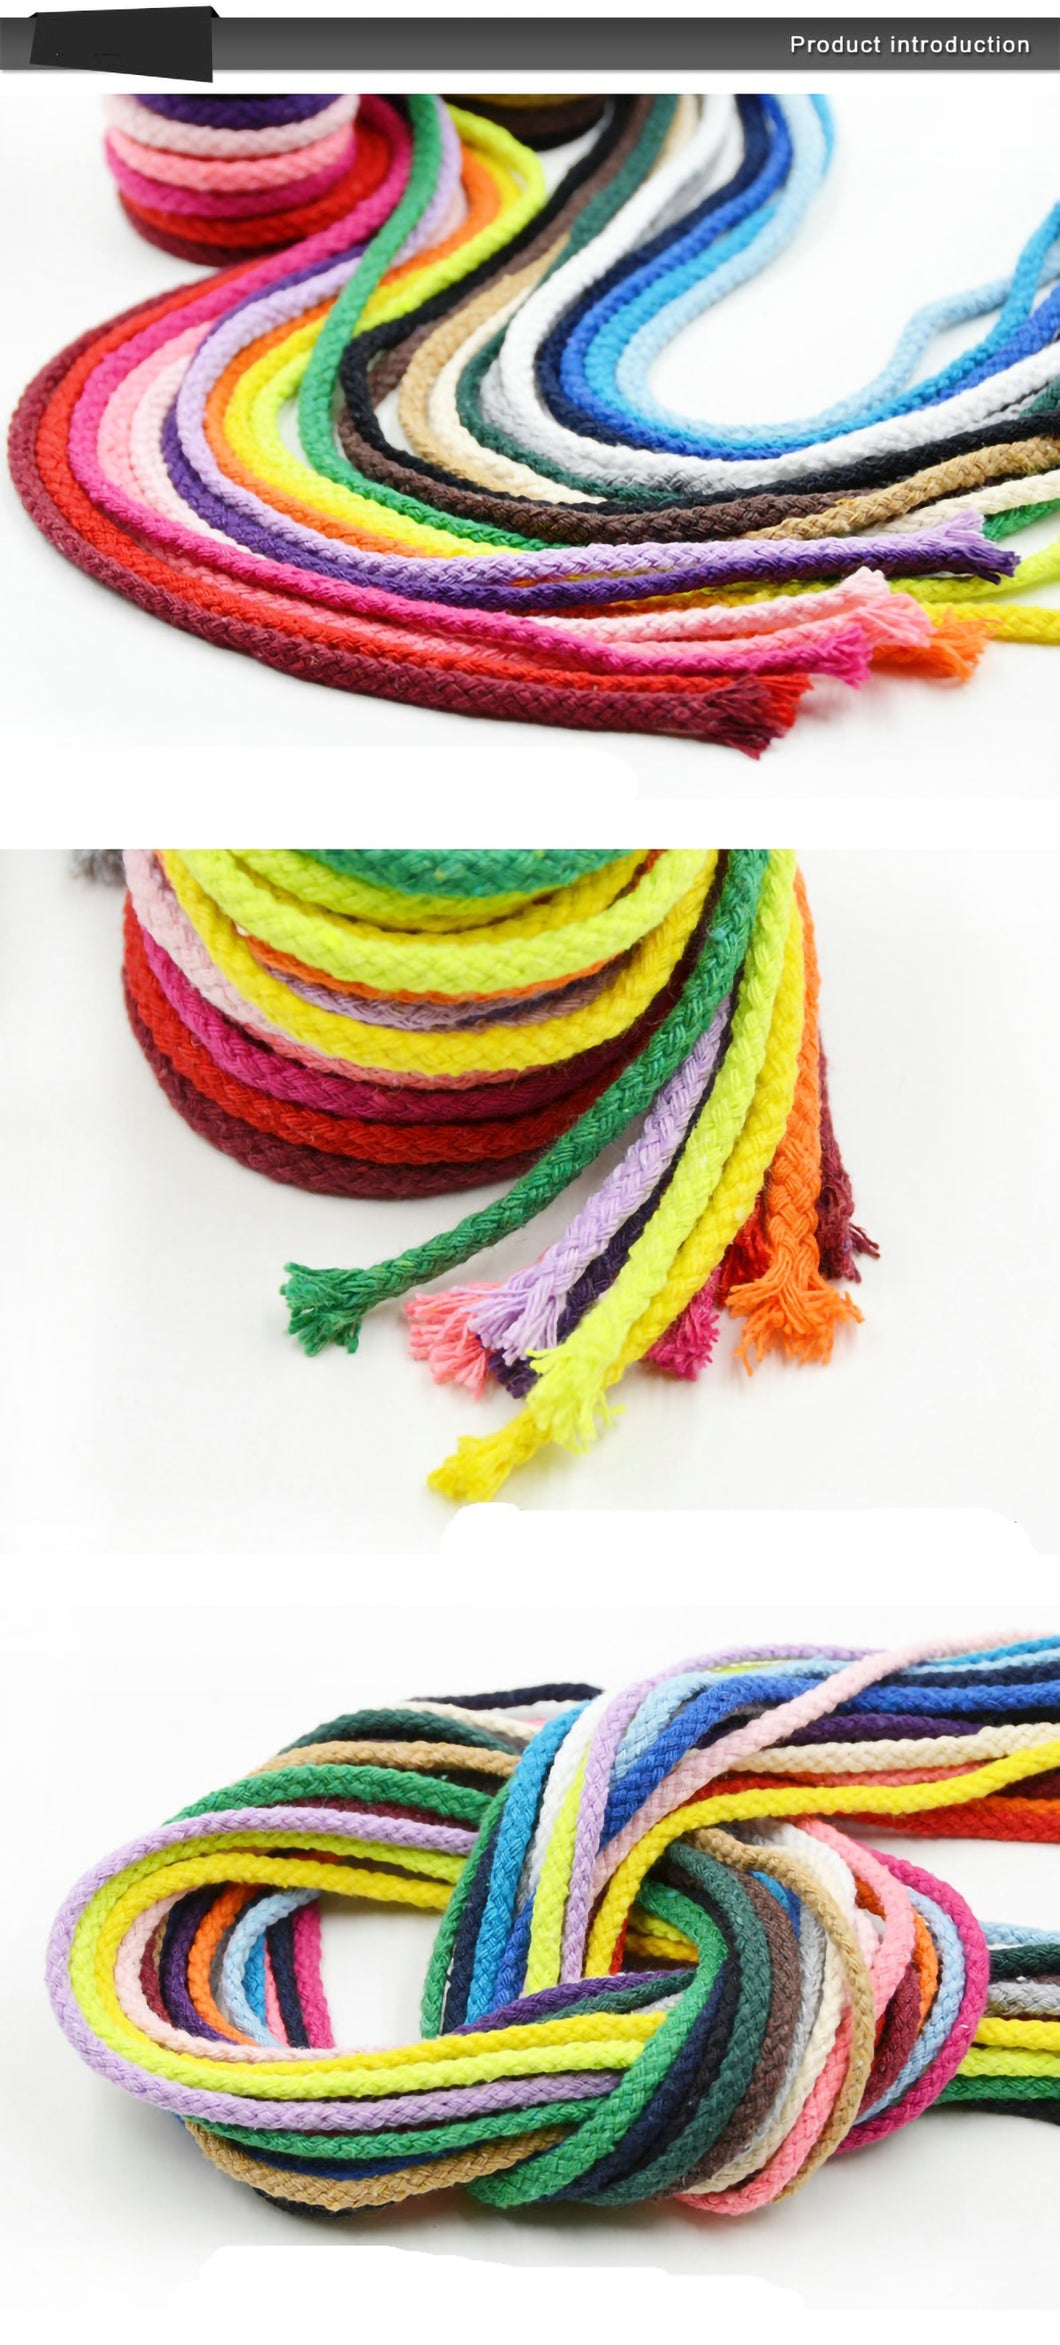 2TRIDENTS Colorful Twisted Cotton Rope - Great for DIY Crafting Home Decor Custom Art - 5mm Thickness - 5m Length (Beige)